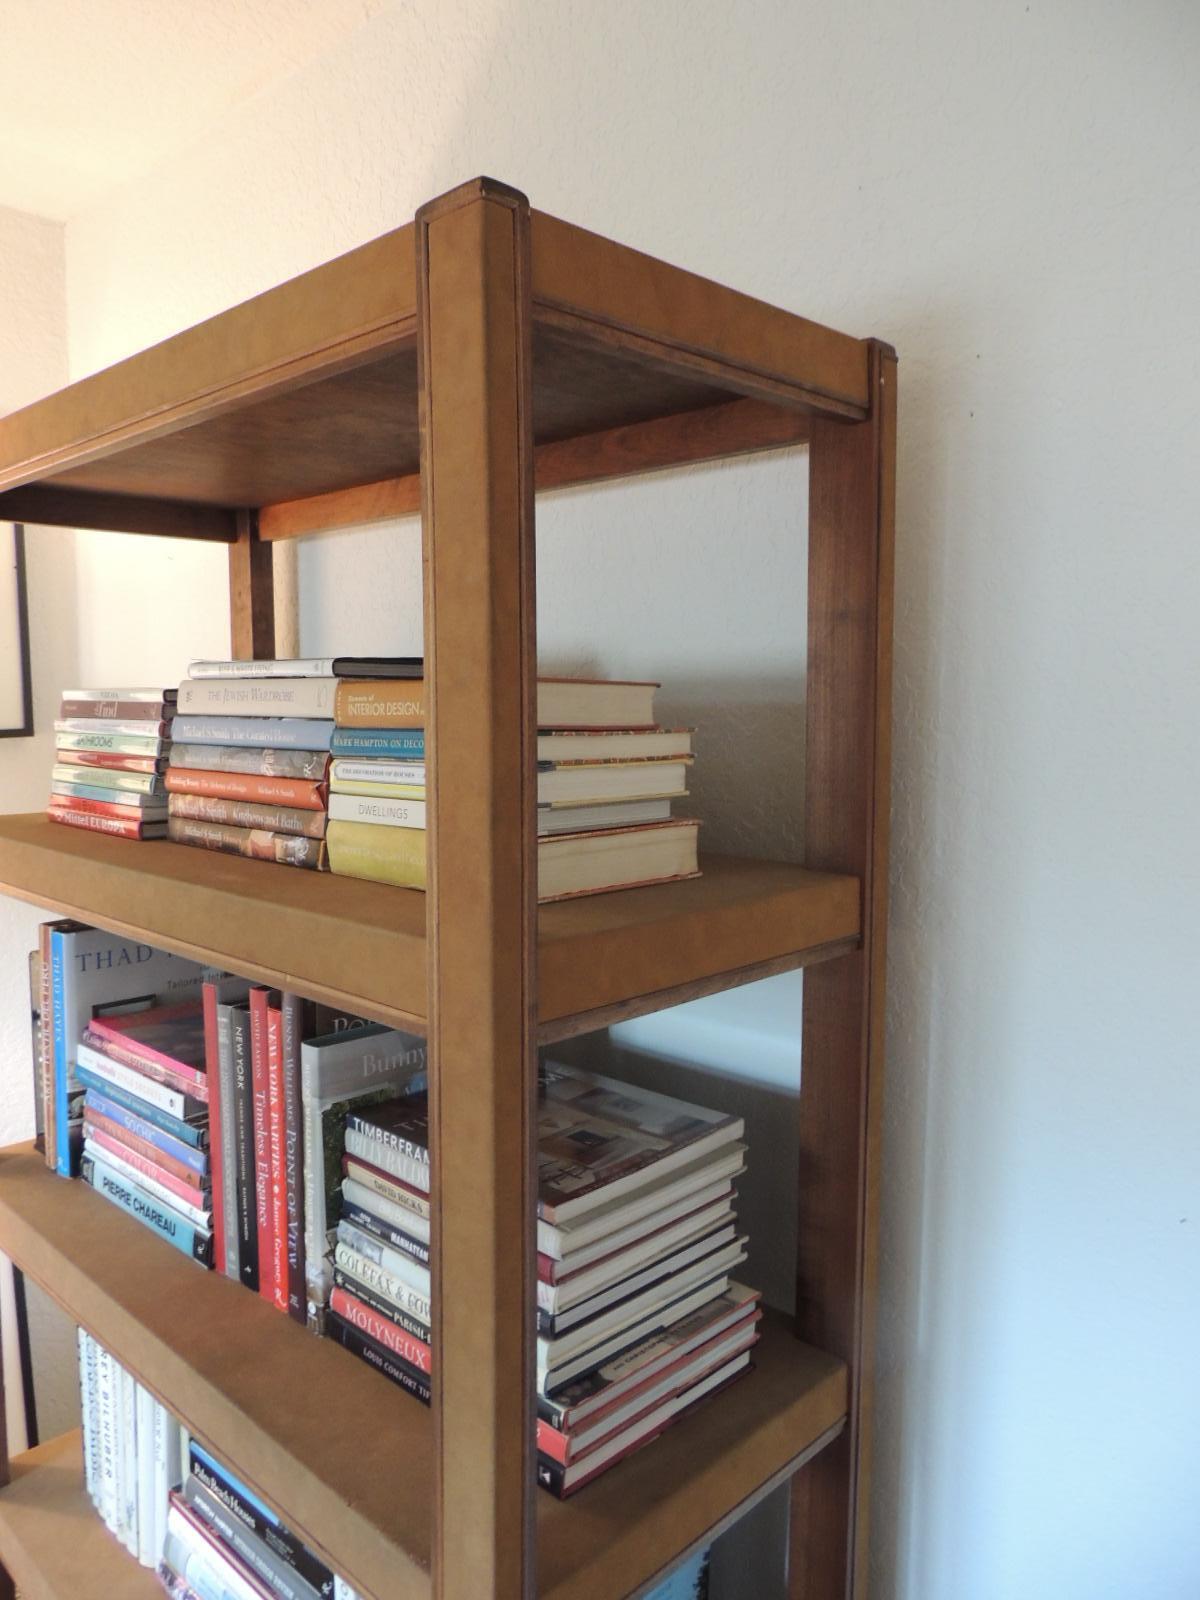 Tall Parson style custom designed tobacco suede color bookcase
custom-made tall Parsons Style rectangular bookcase. Covered in suede texture paper and wood veneer details. Finished on all sides can be used freestanding in any room. The under- side